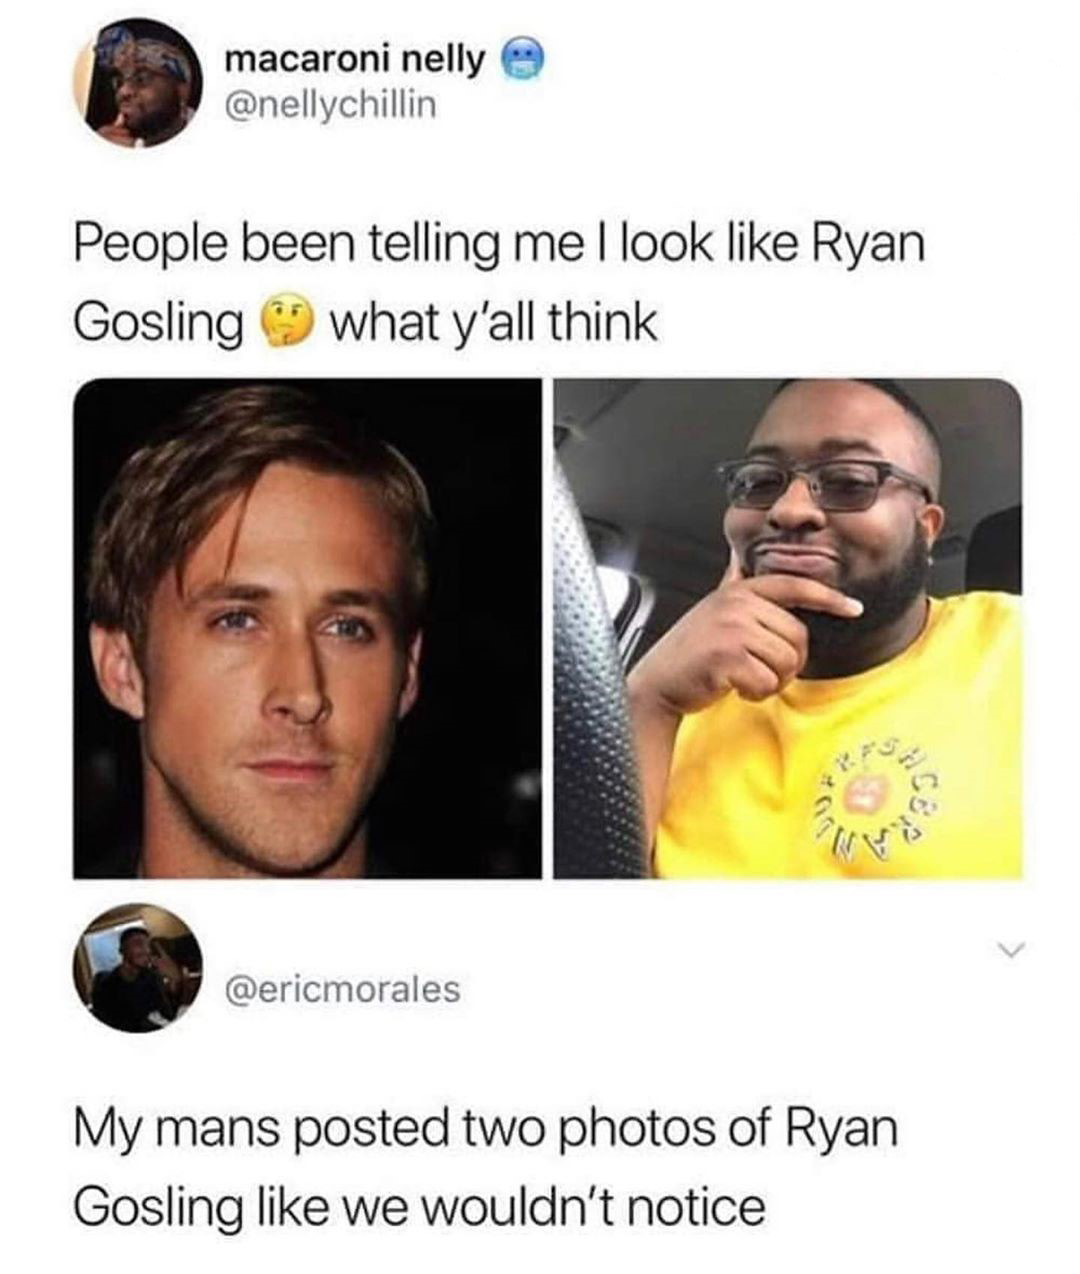 d you post the same picture twice - macaroni nelly People been telling me I look Ryan Gosling what y'all think My mans posted two photos of Ryan Gosling we wouldn't notice